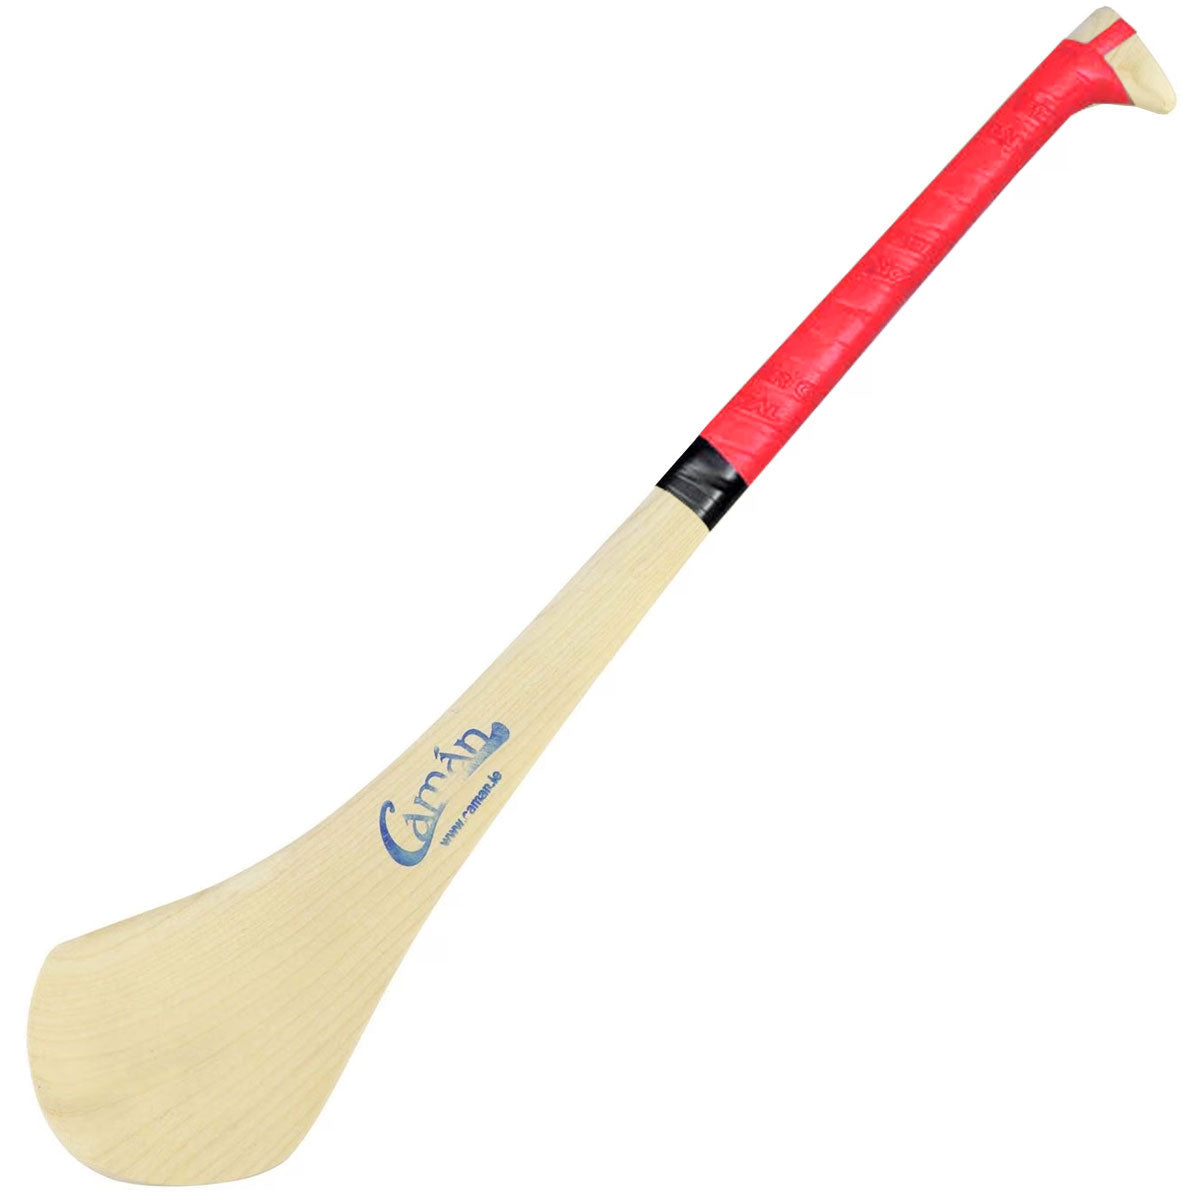 Caman Hurling Stick size 26 (Inches)